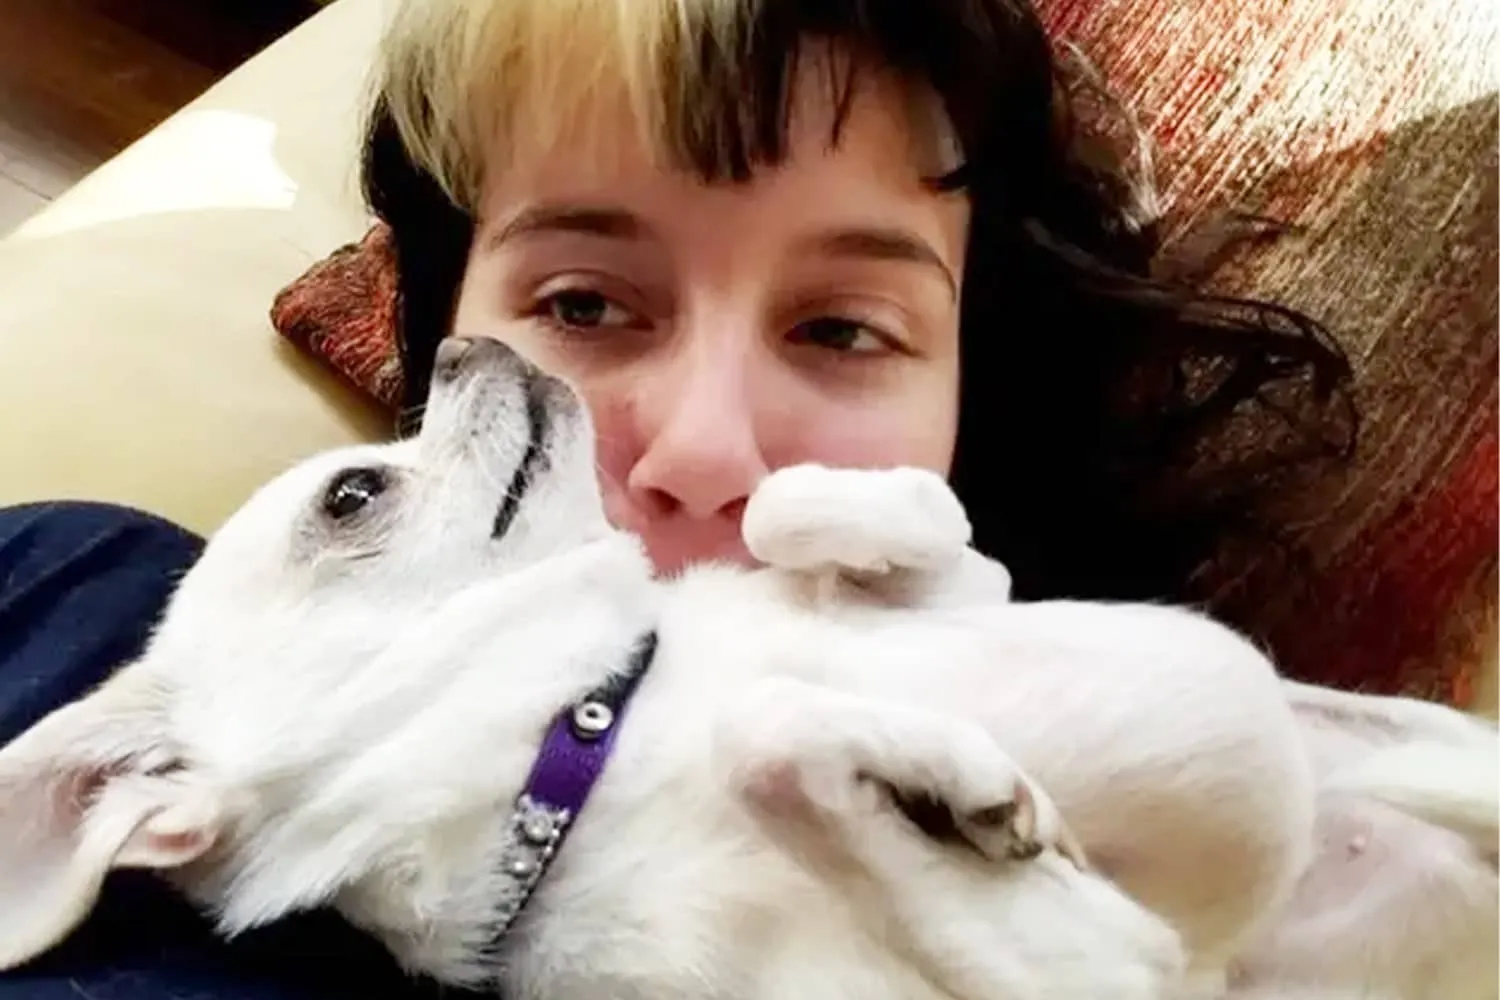 Chihuahuas Are Too Vicious to Cuddle With
